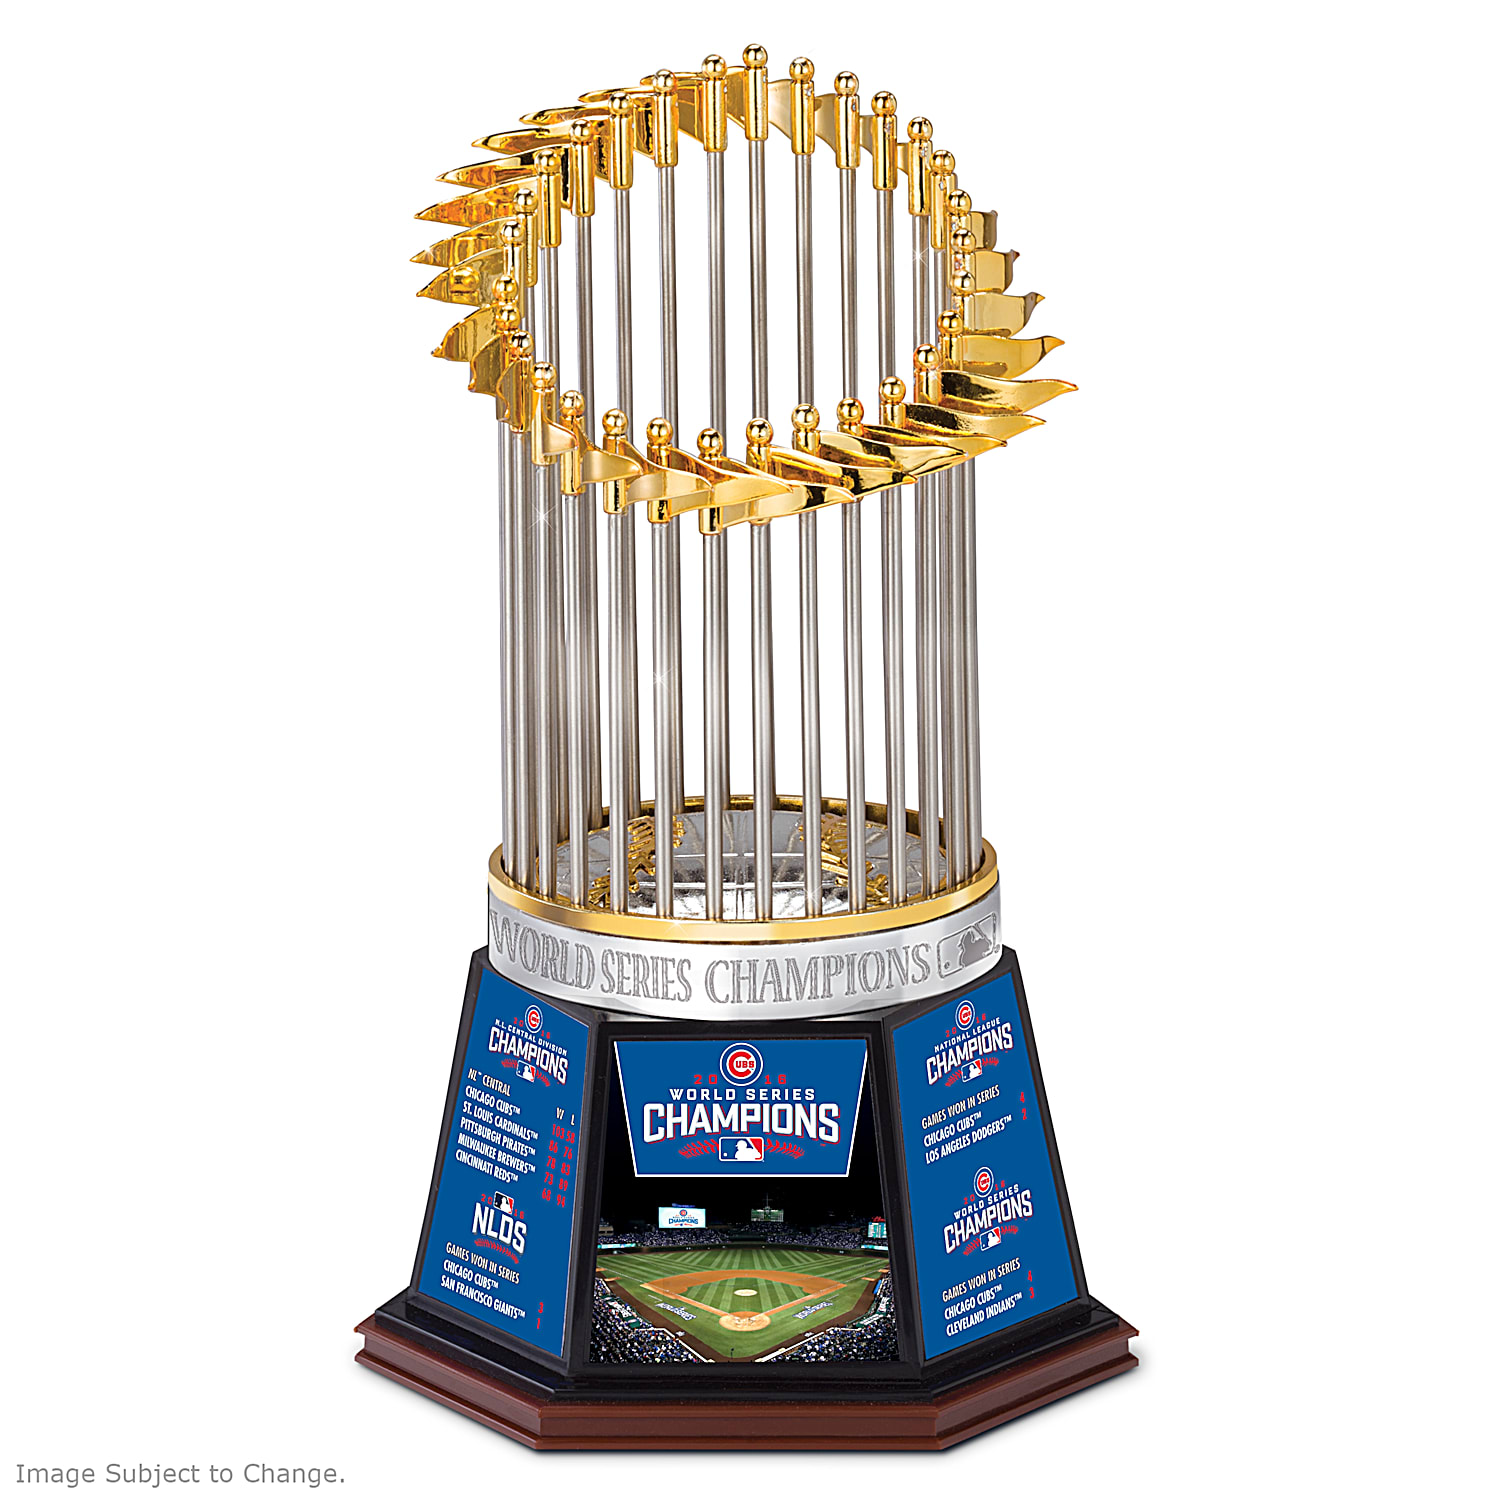 Chicago Cubs 2016 World Series Champions Commemorative DVD 